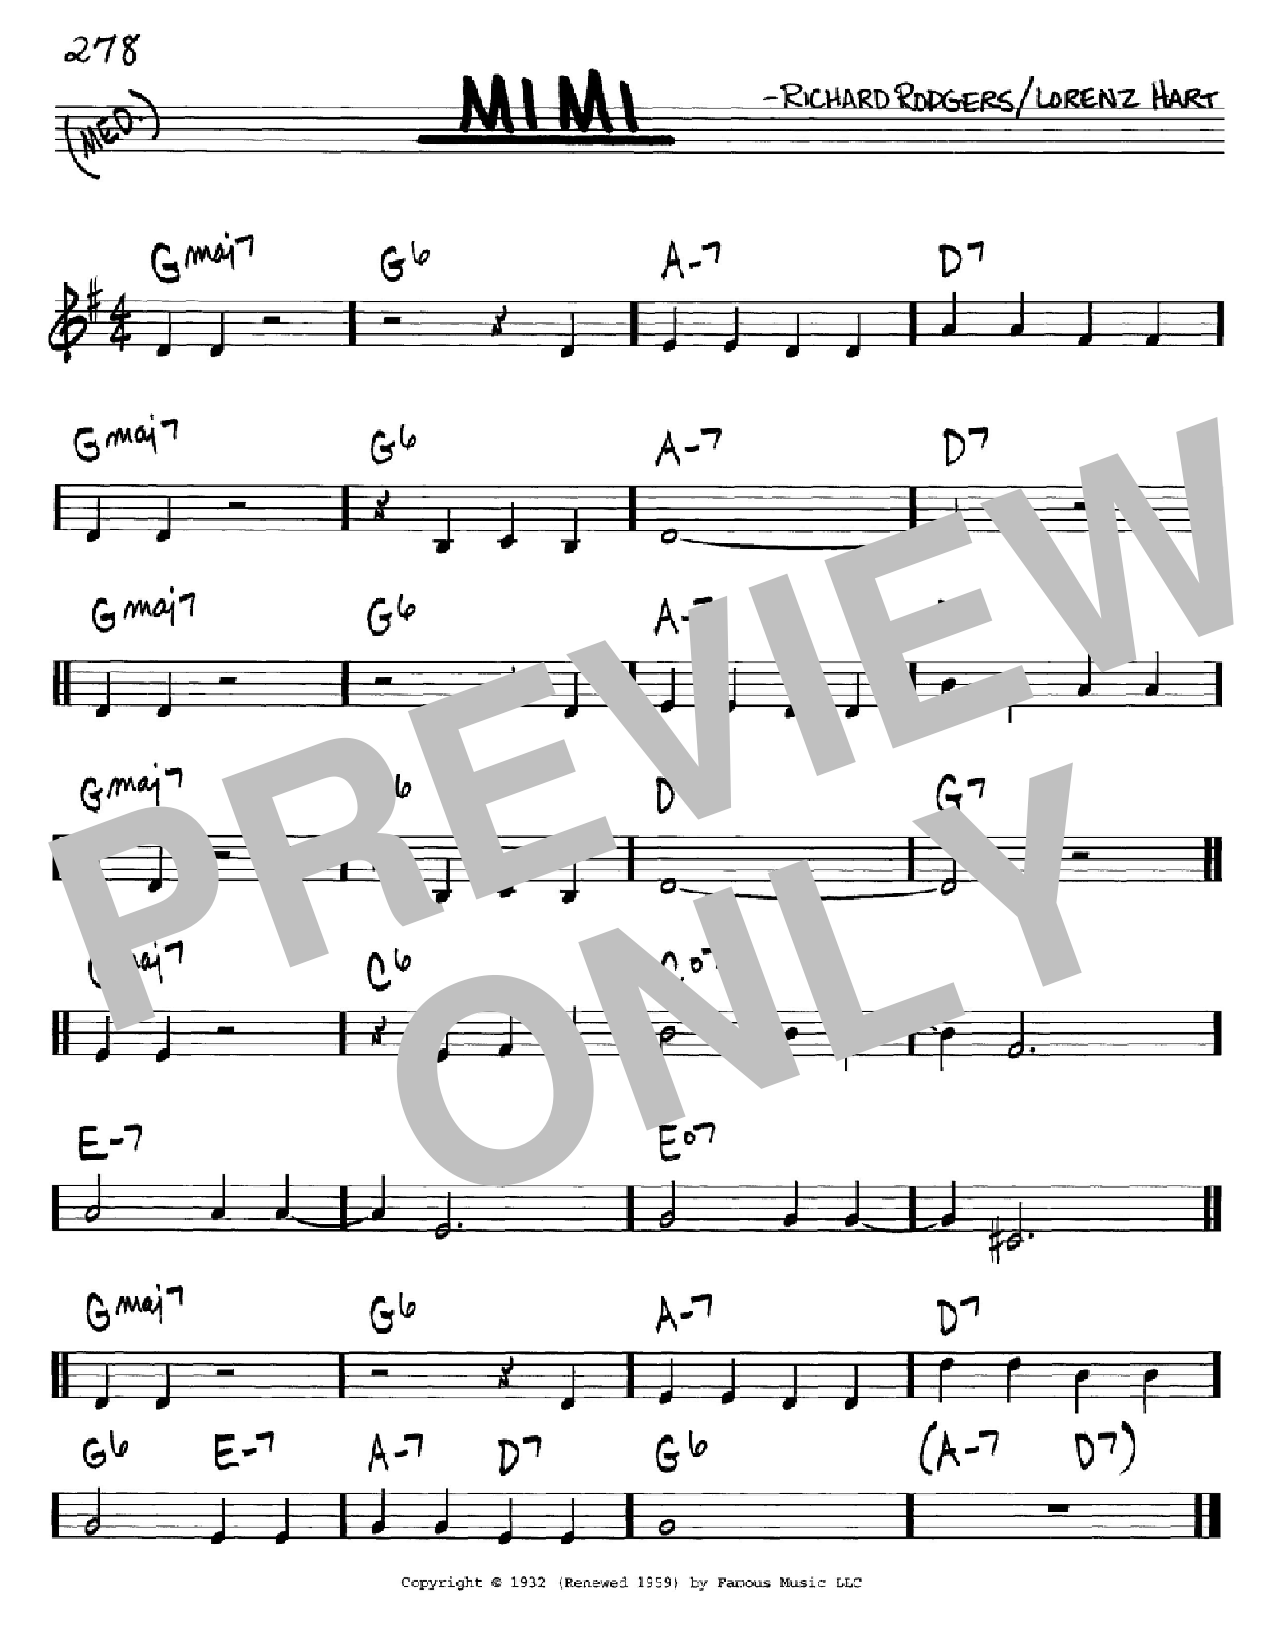 Download Rodgers & Hart Mimi Sheet Music